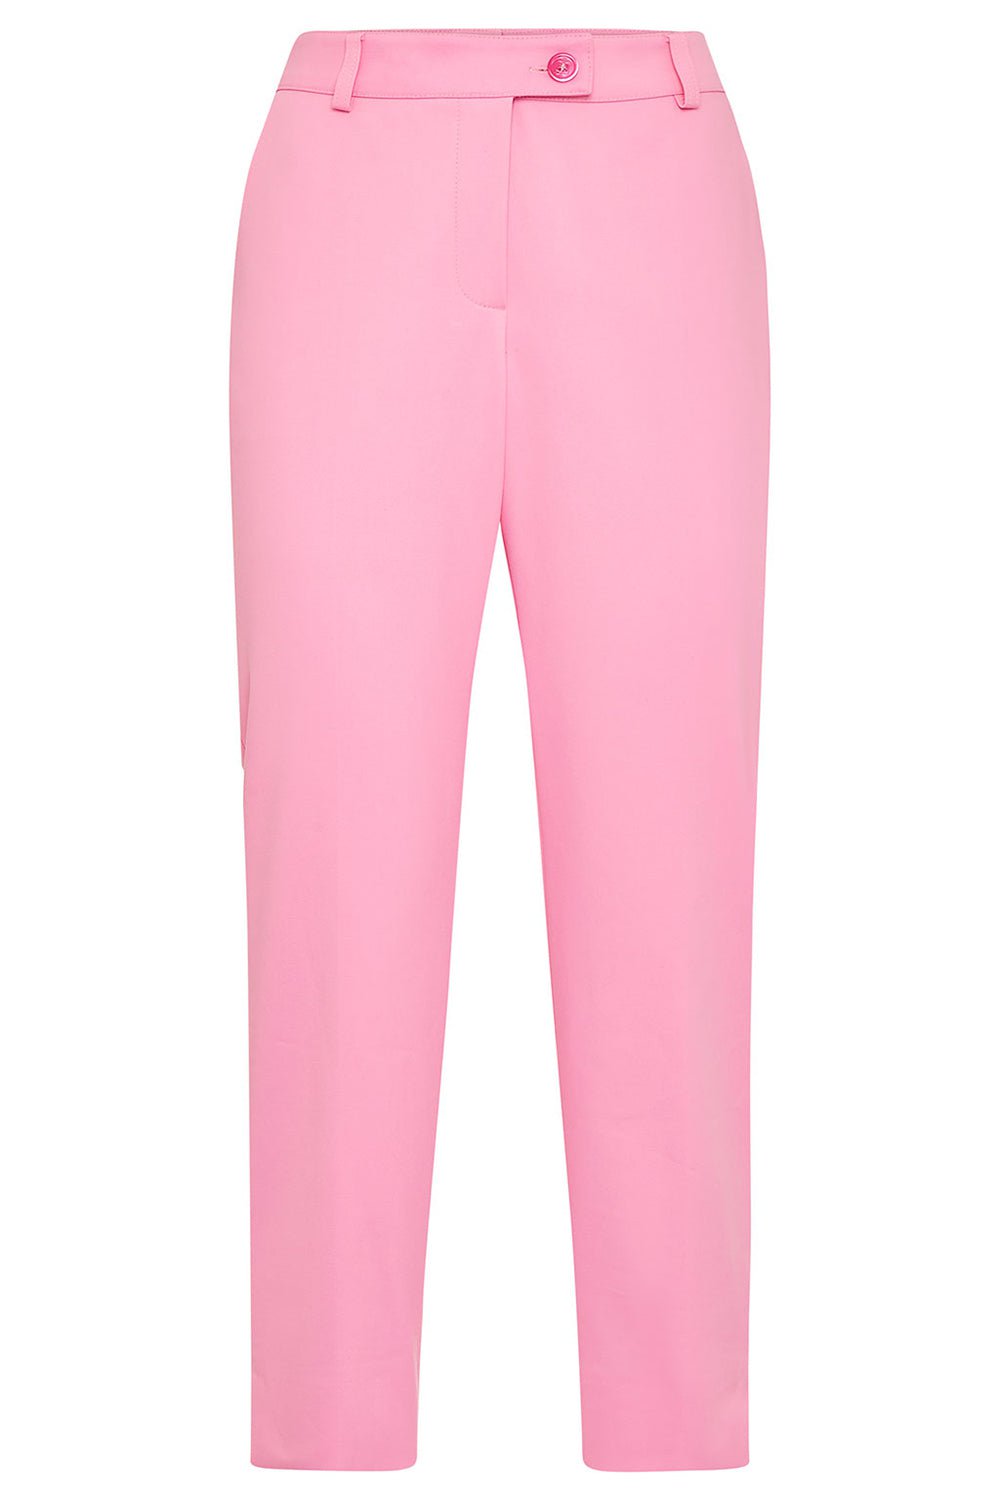 MAISON COMMON-Slim Cropped Pant - Pink-